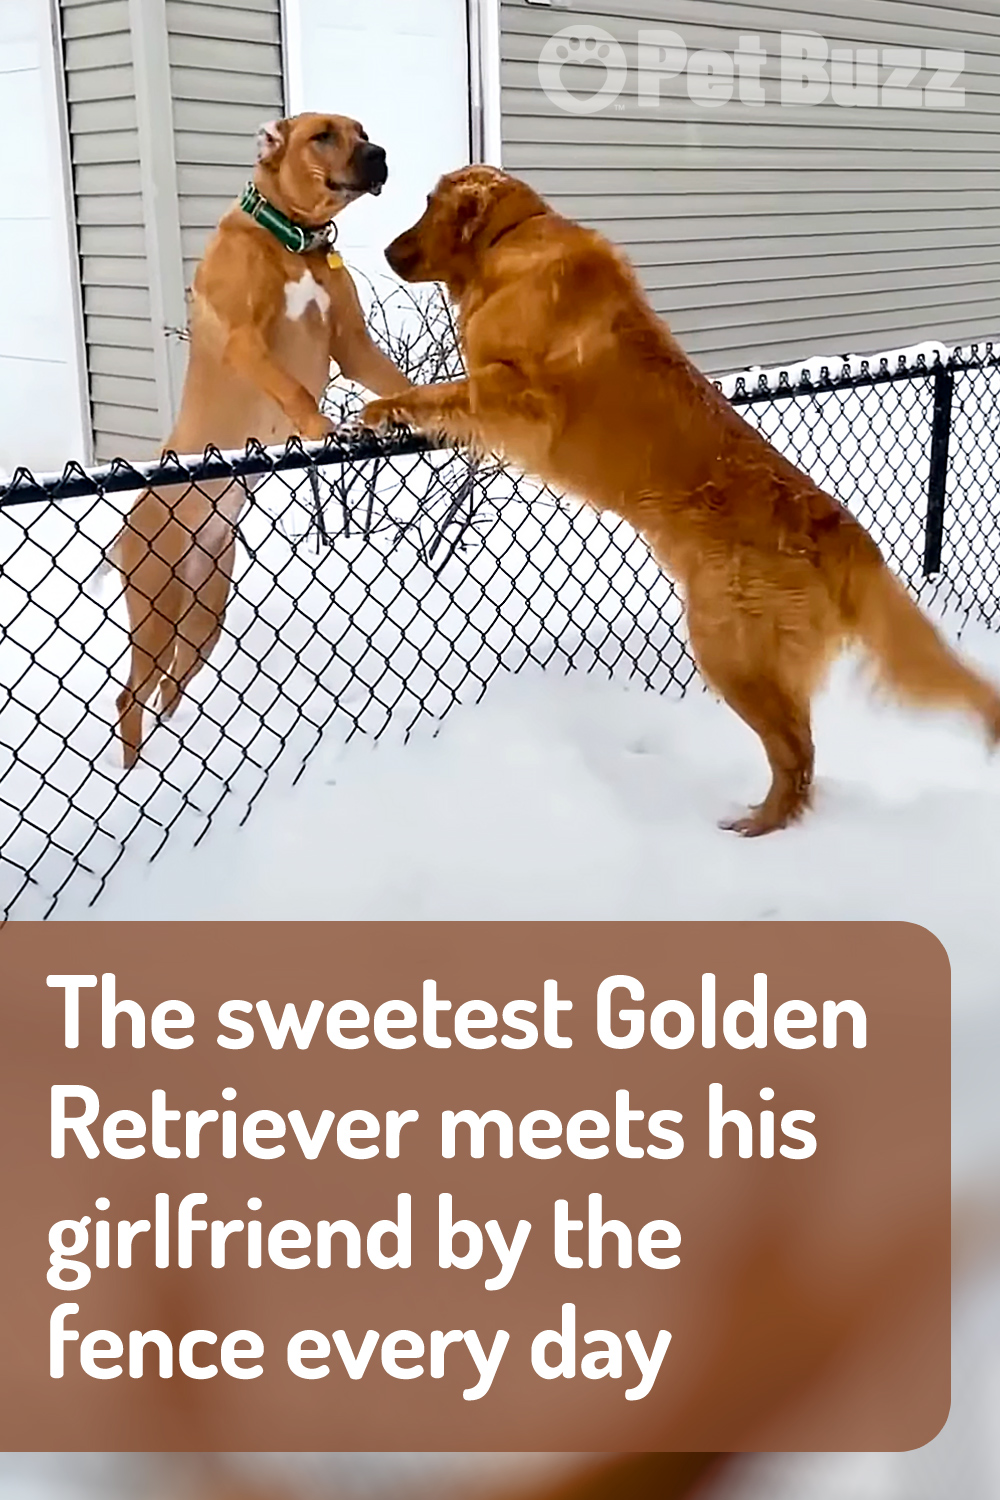 The sweetest Golden Retriever meets his girlfriend by the fence every day